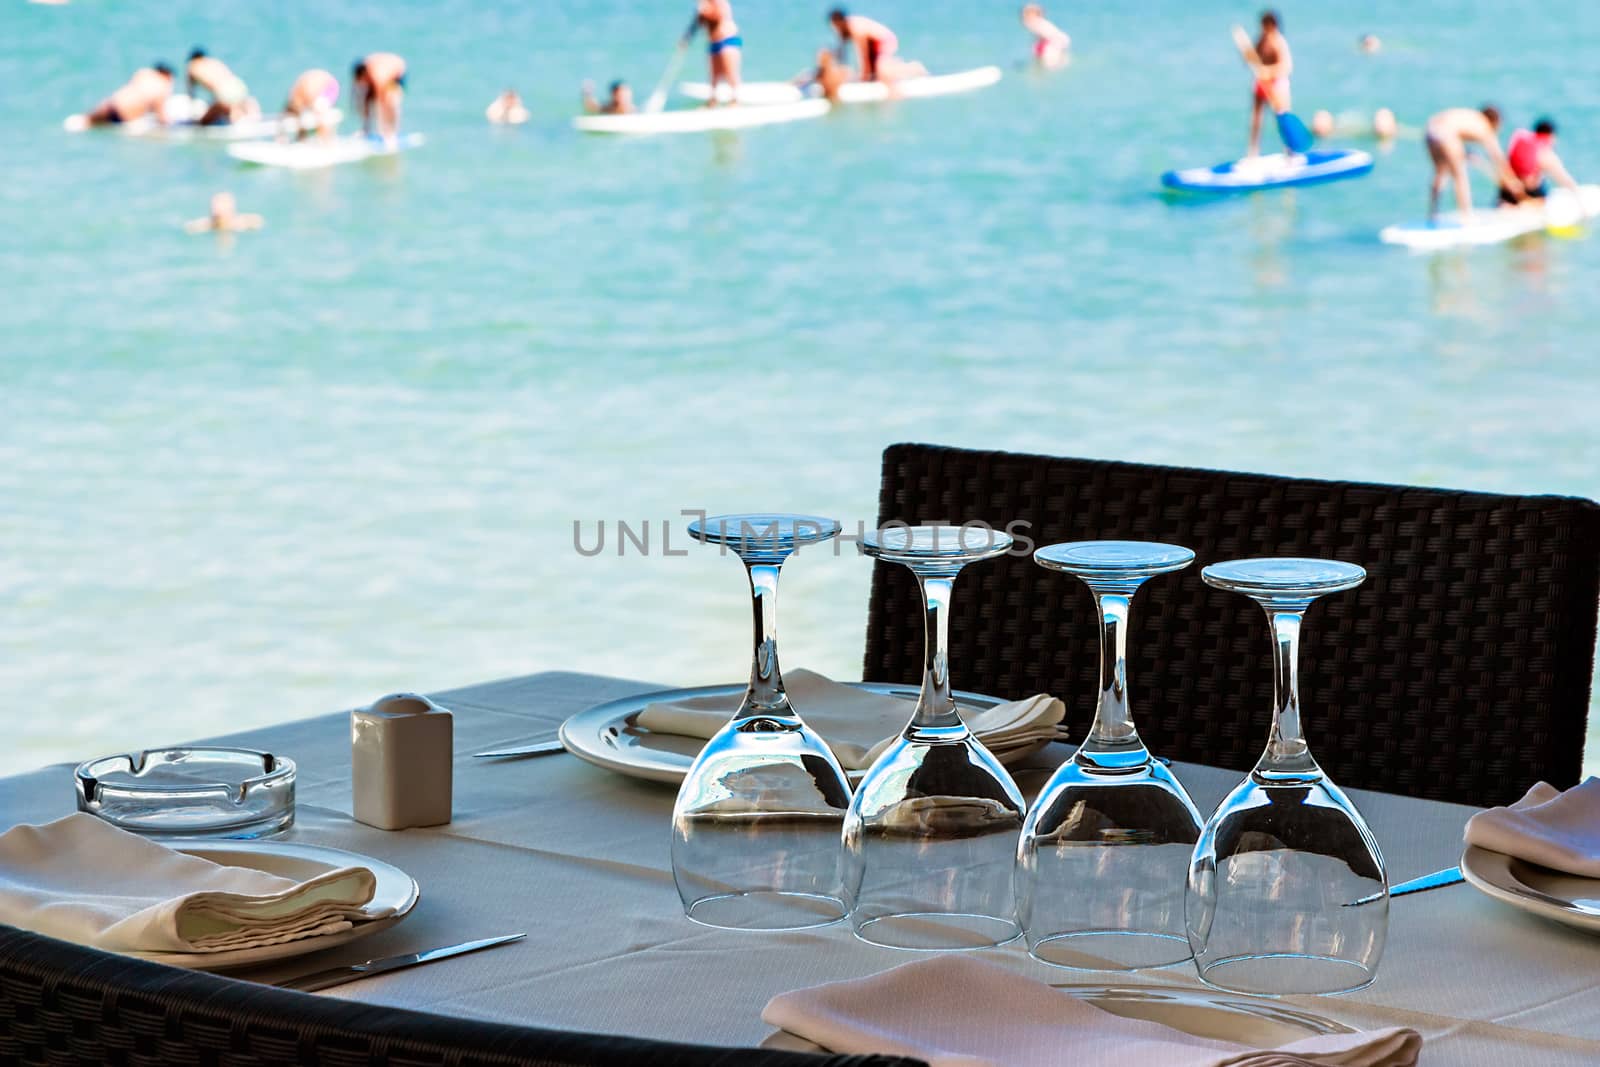 Restaurant on the seashore with the table set. Horizontal image.